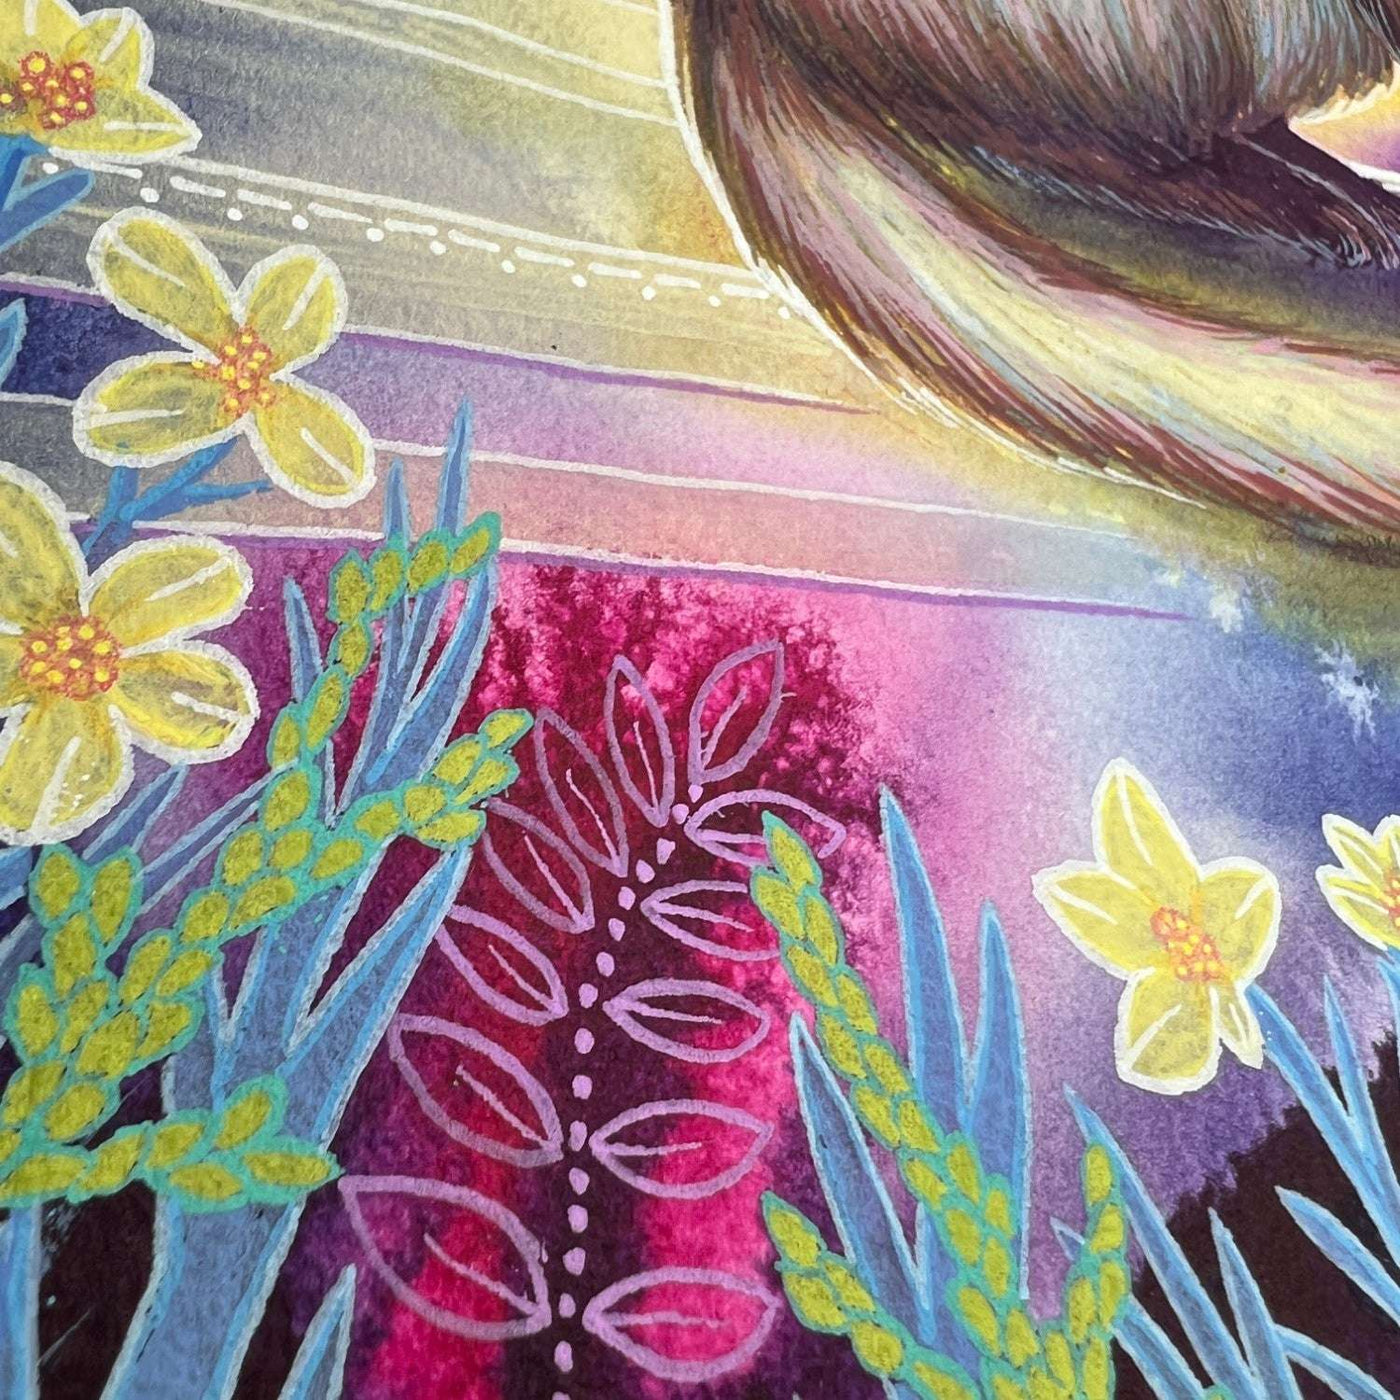 "The Ferret - Original Artwork" seen from a low angle, focusing on vibrant yellow flowers and ornate plant patterns against purple and blue hues.